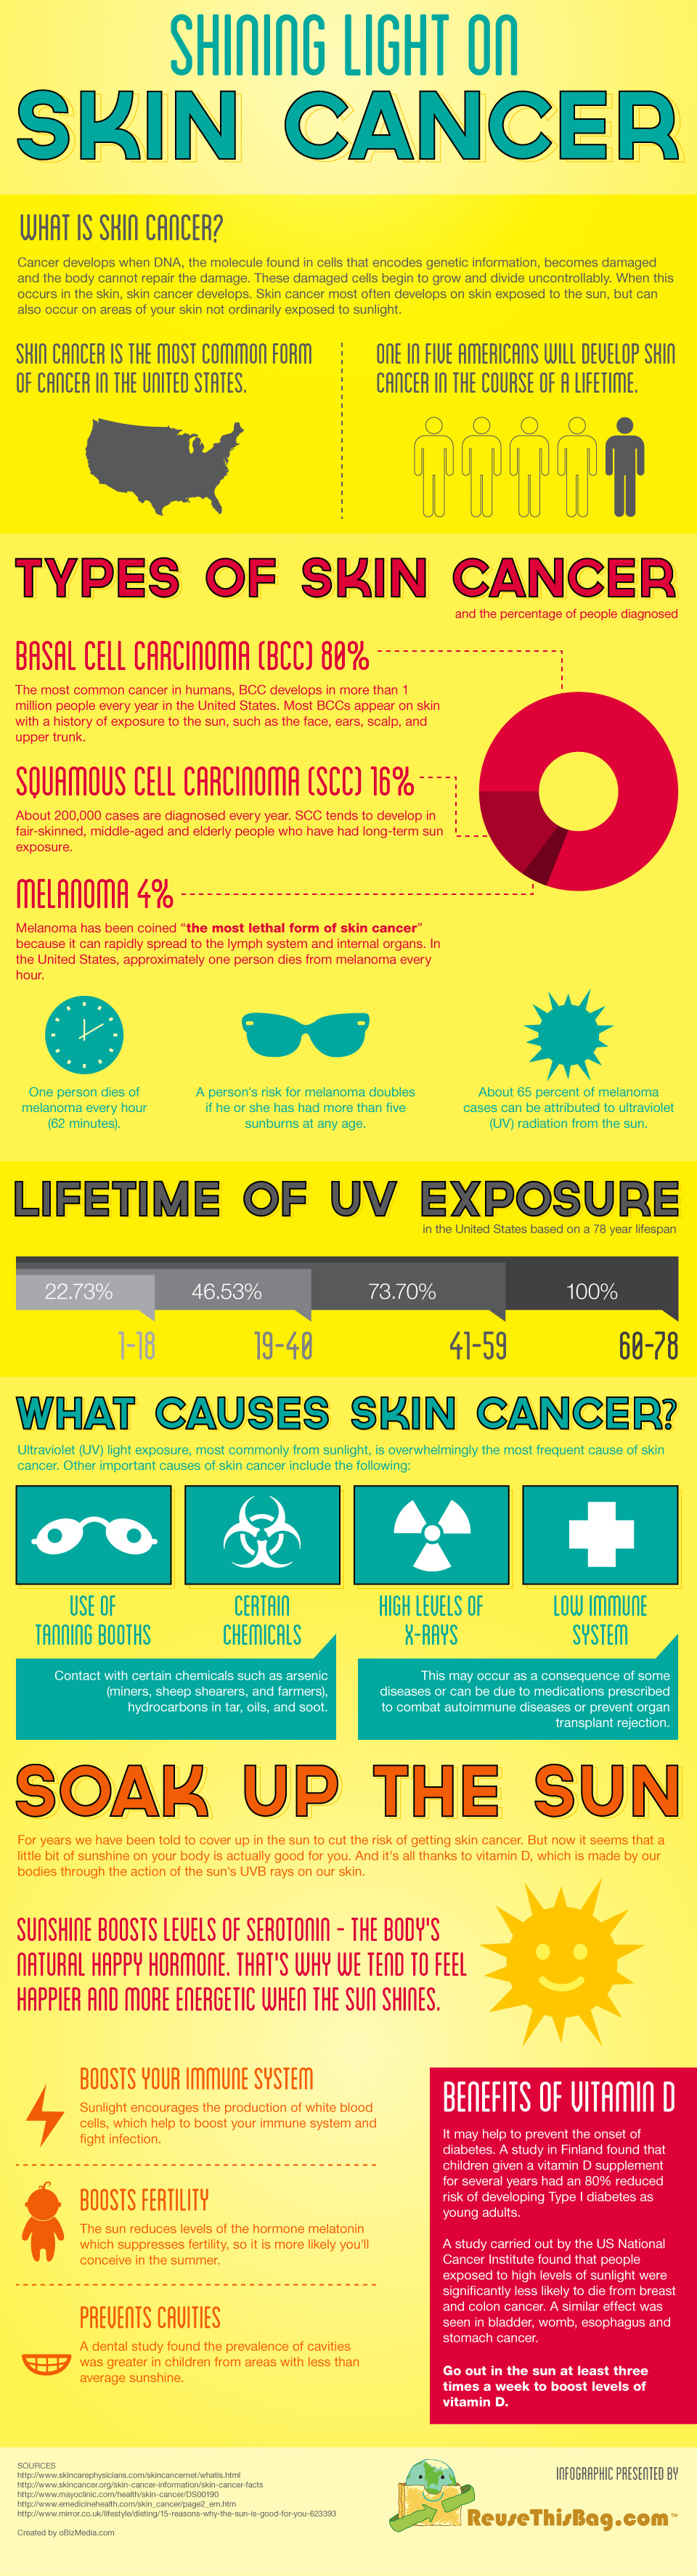 What Is Skin Cancer? Infographic